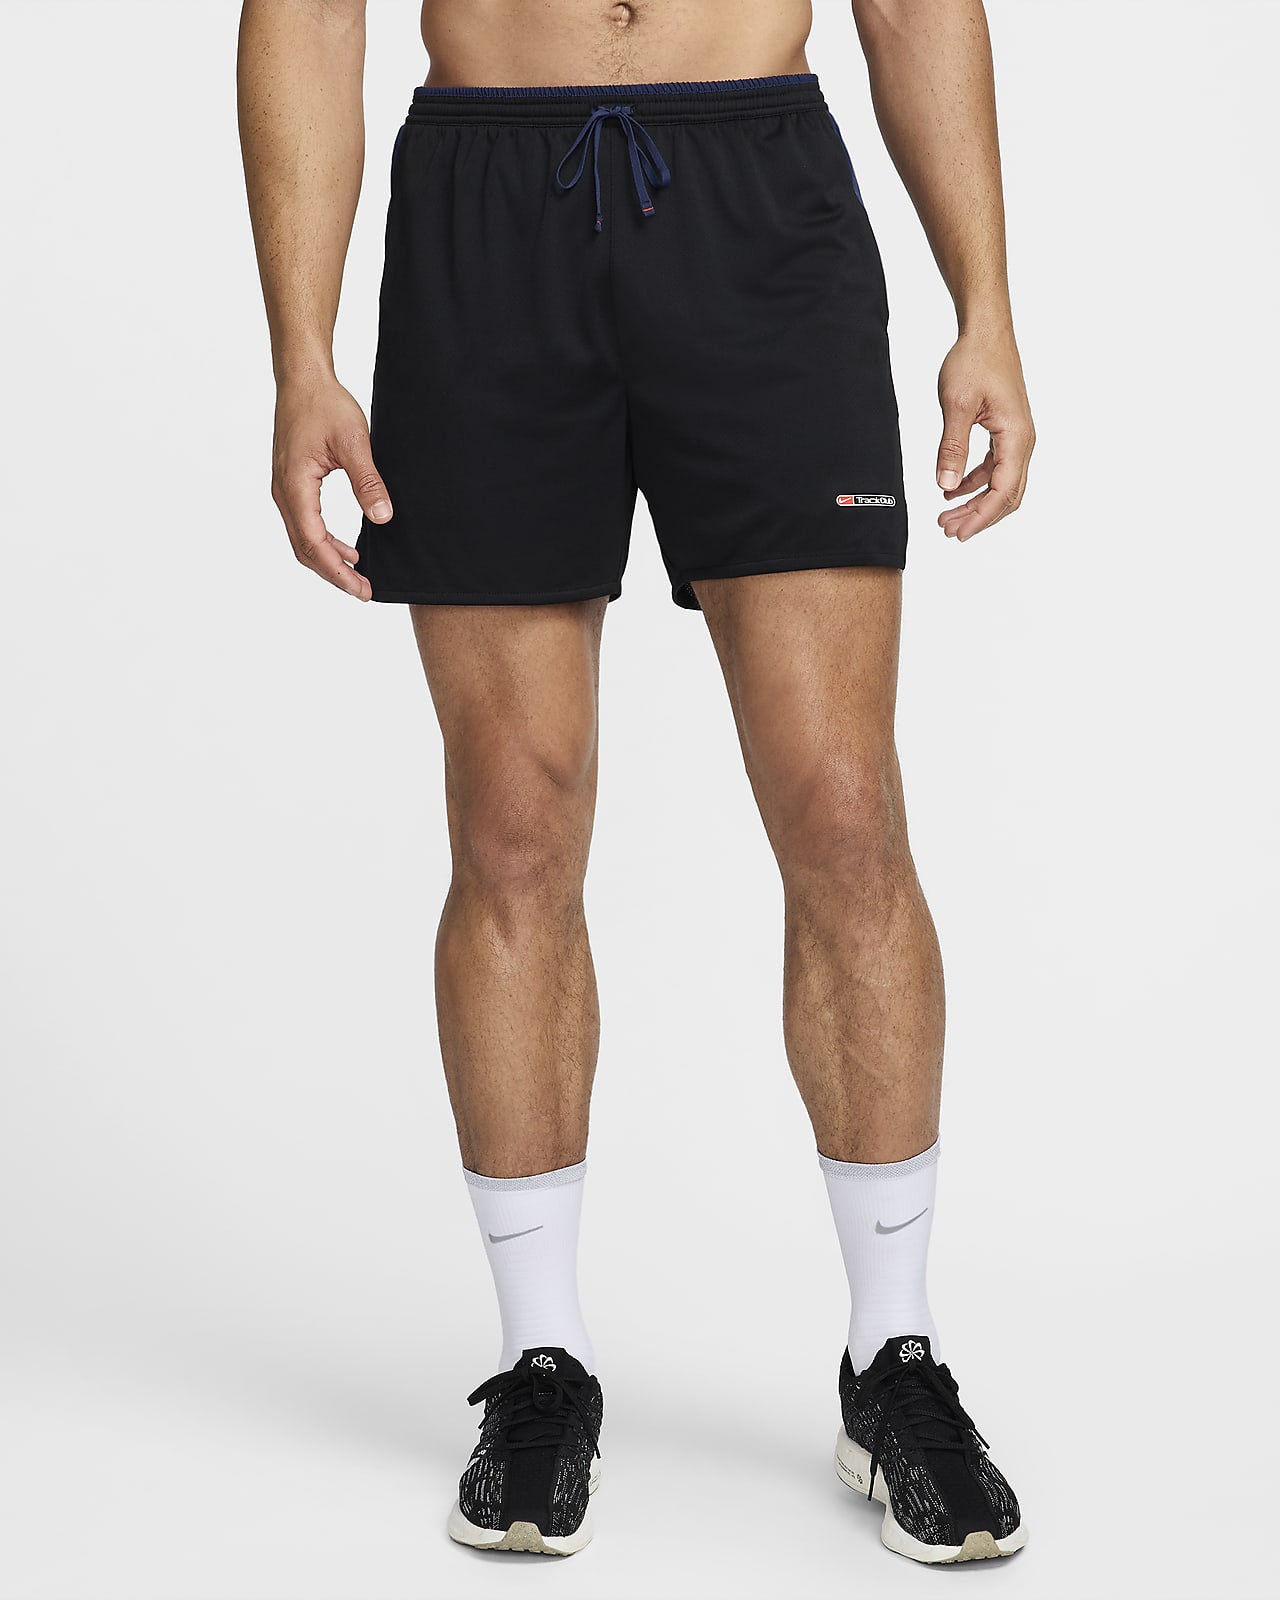 Nike Track Club Men's Dri-FIT 13cm (approx.) Brief-Lined Running Shorts